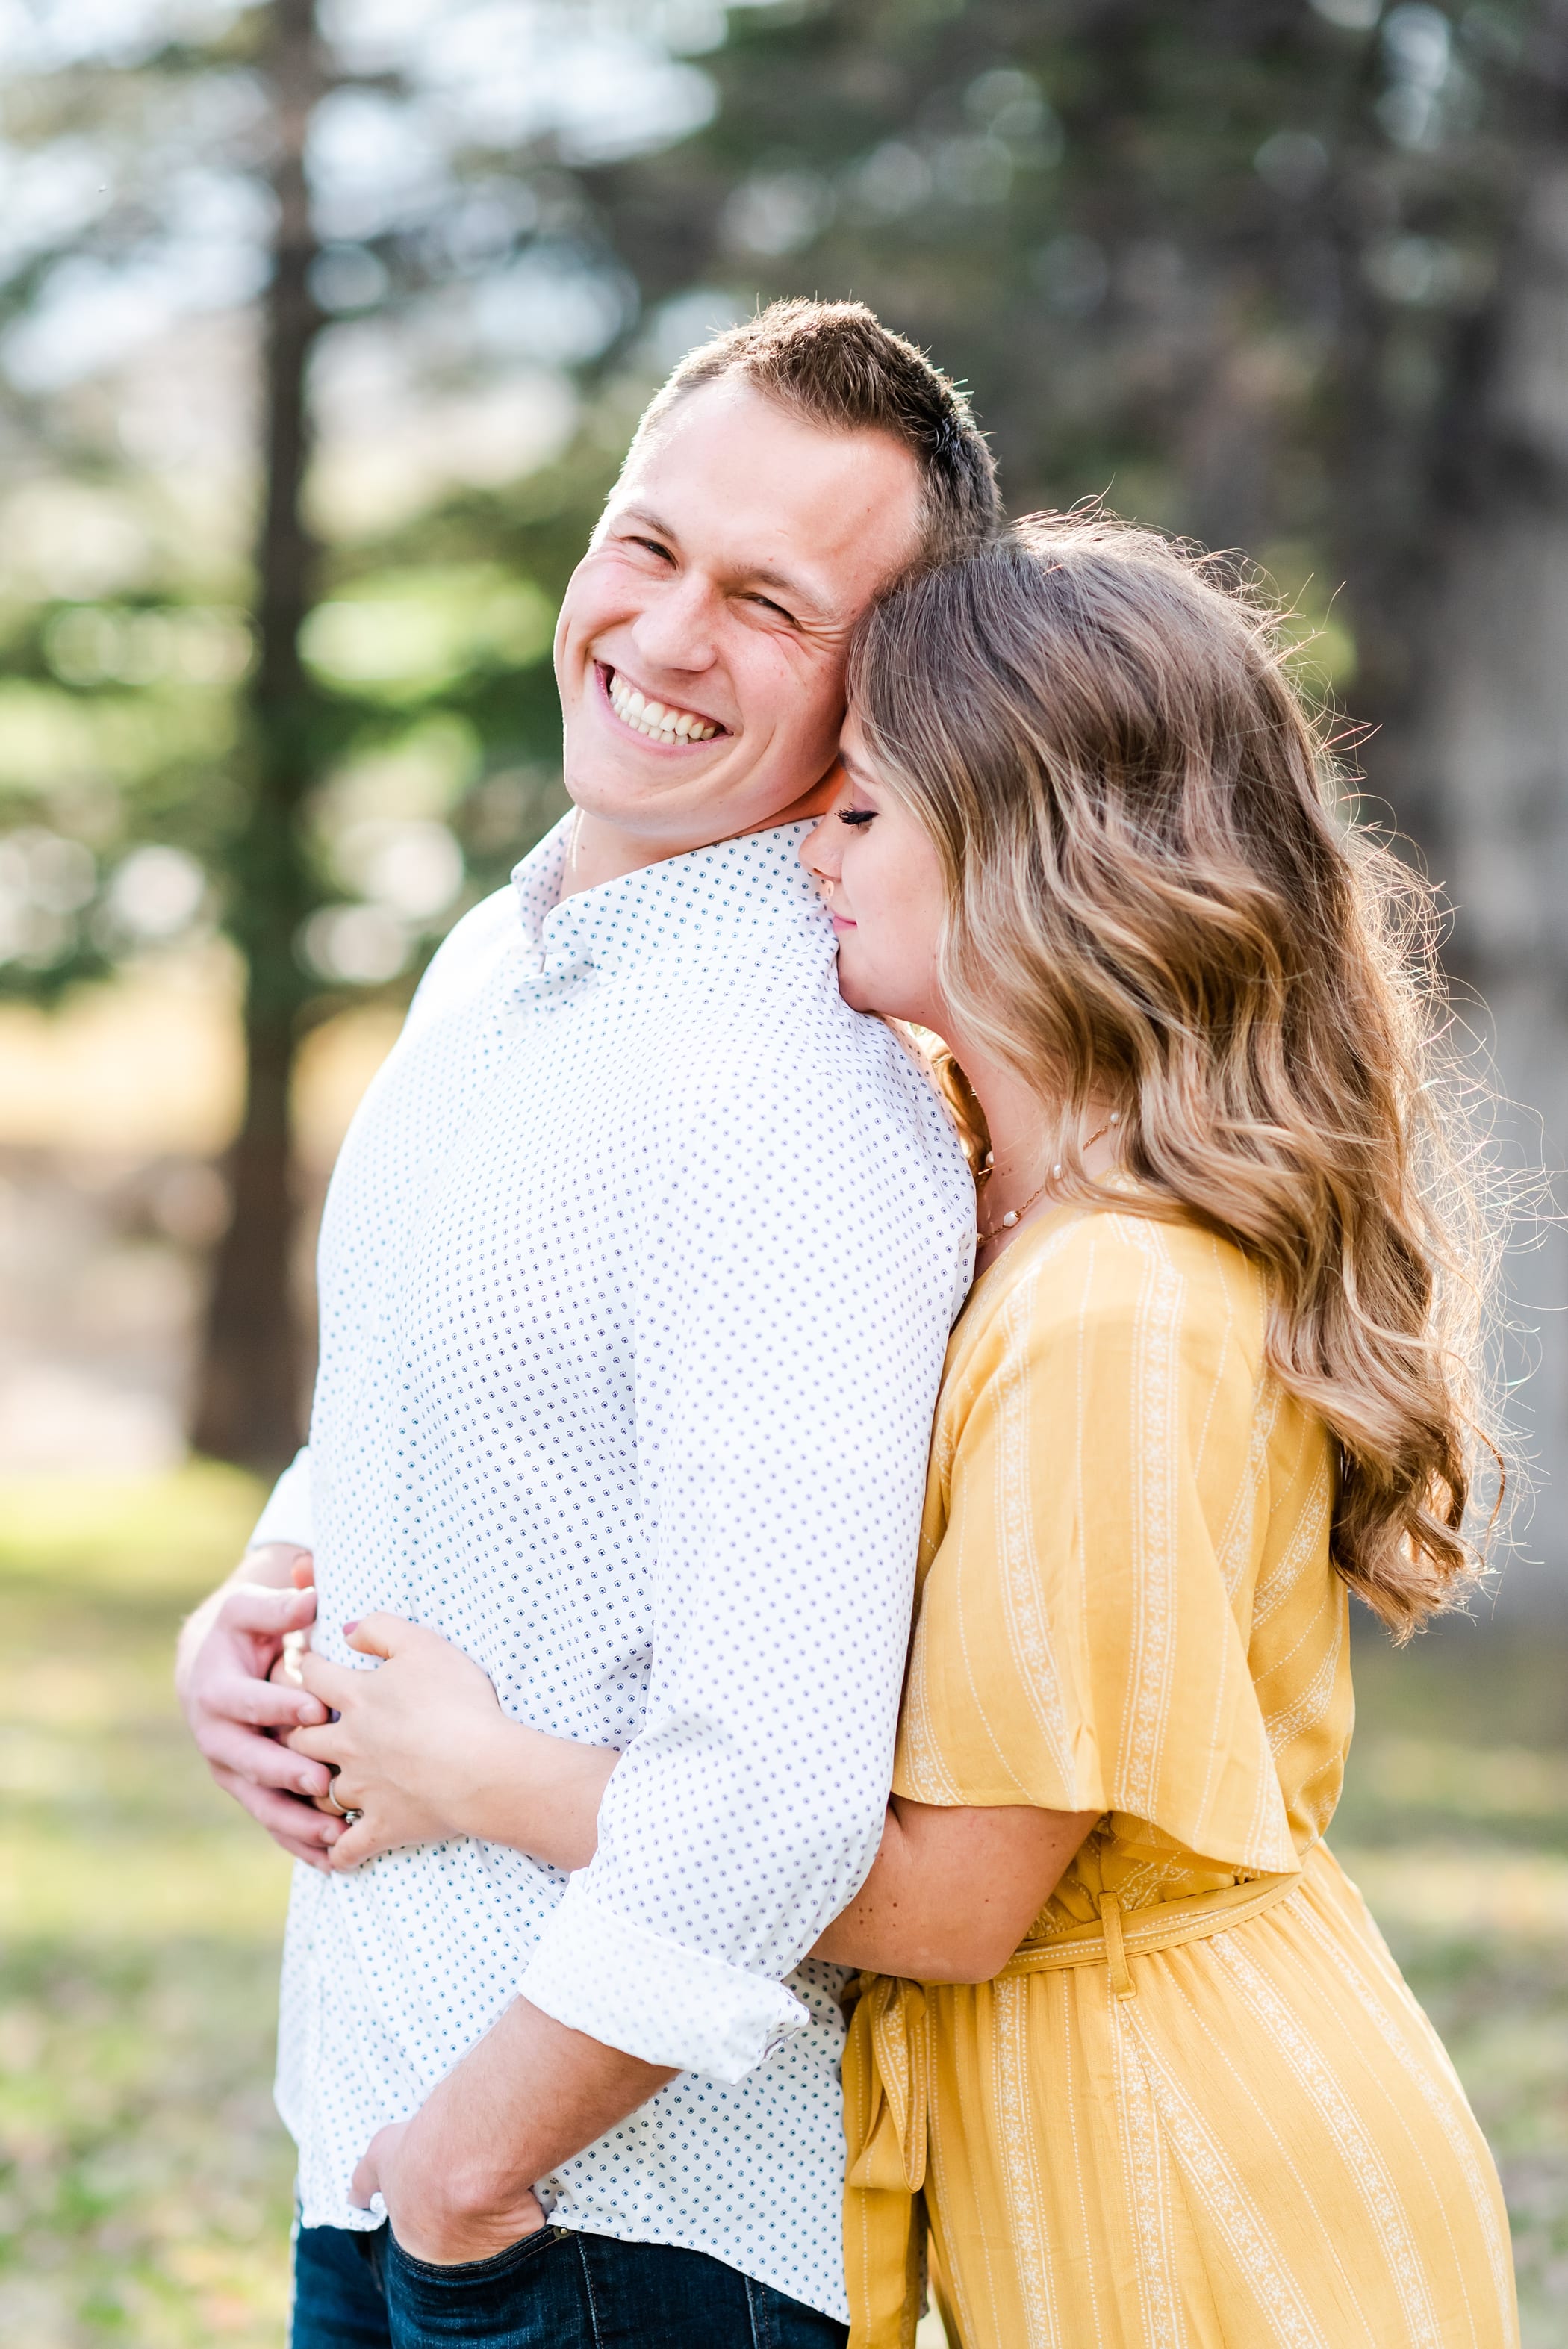 what to wear in spring engagement photos: yellow dress and white button up